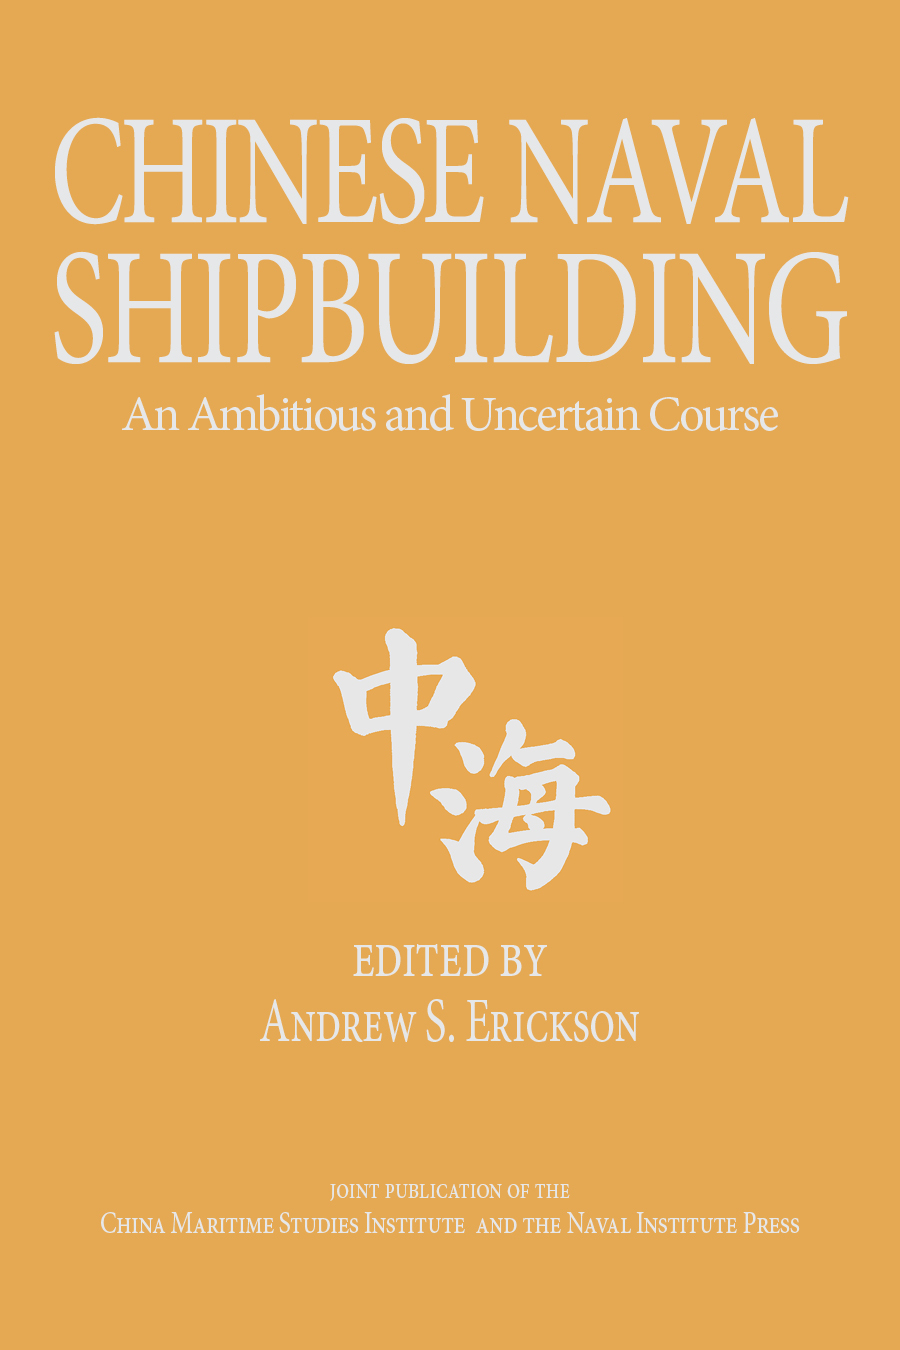 Andrew S. Erickson, ed., Chinese Naval Shipbuilding: An Ambitious and Uncertain Course (Annapolis, MD: Naval Institute Press, 2016).